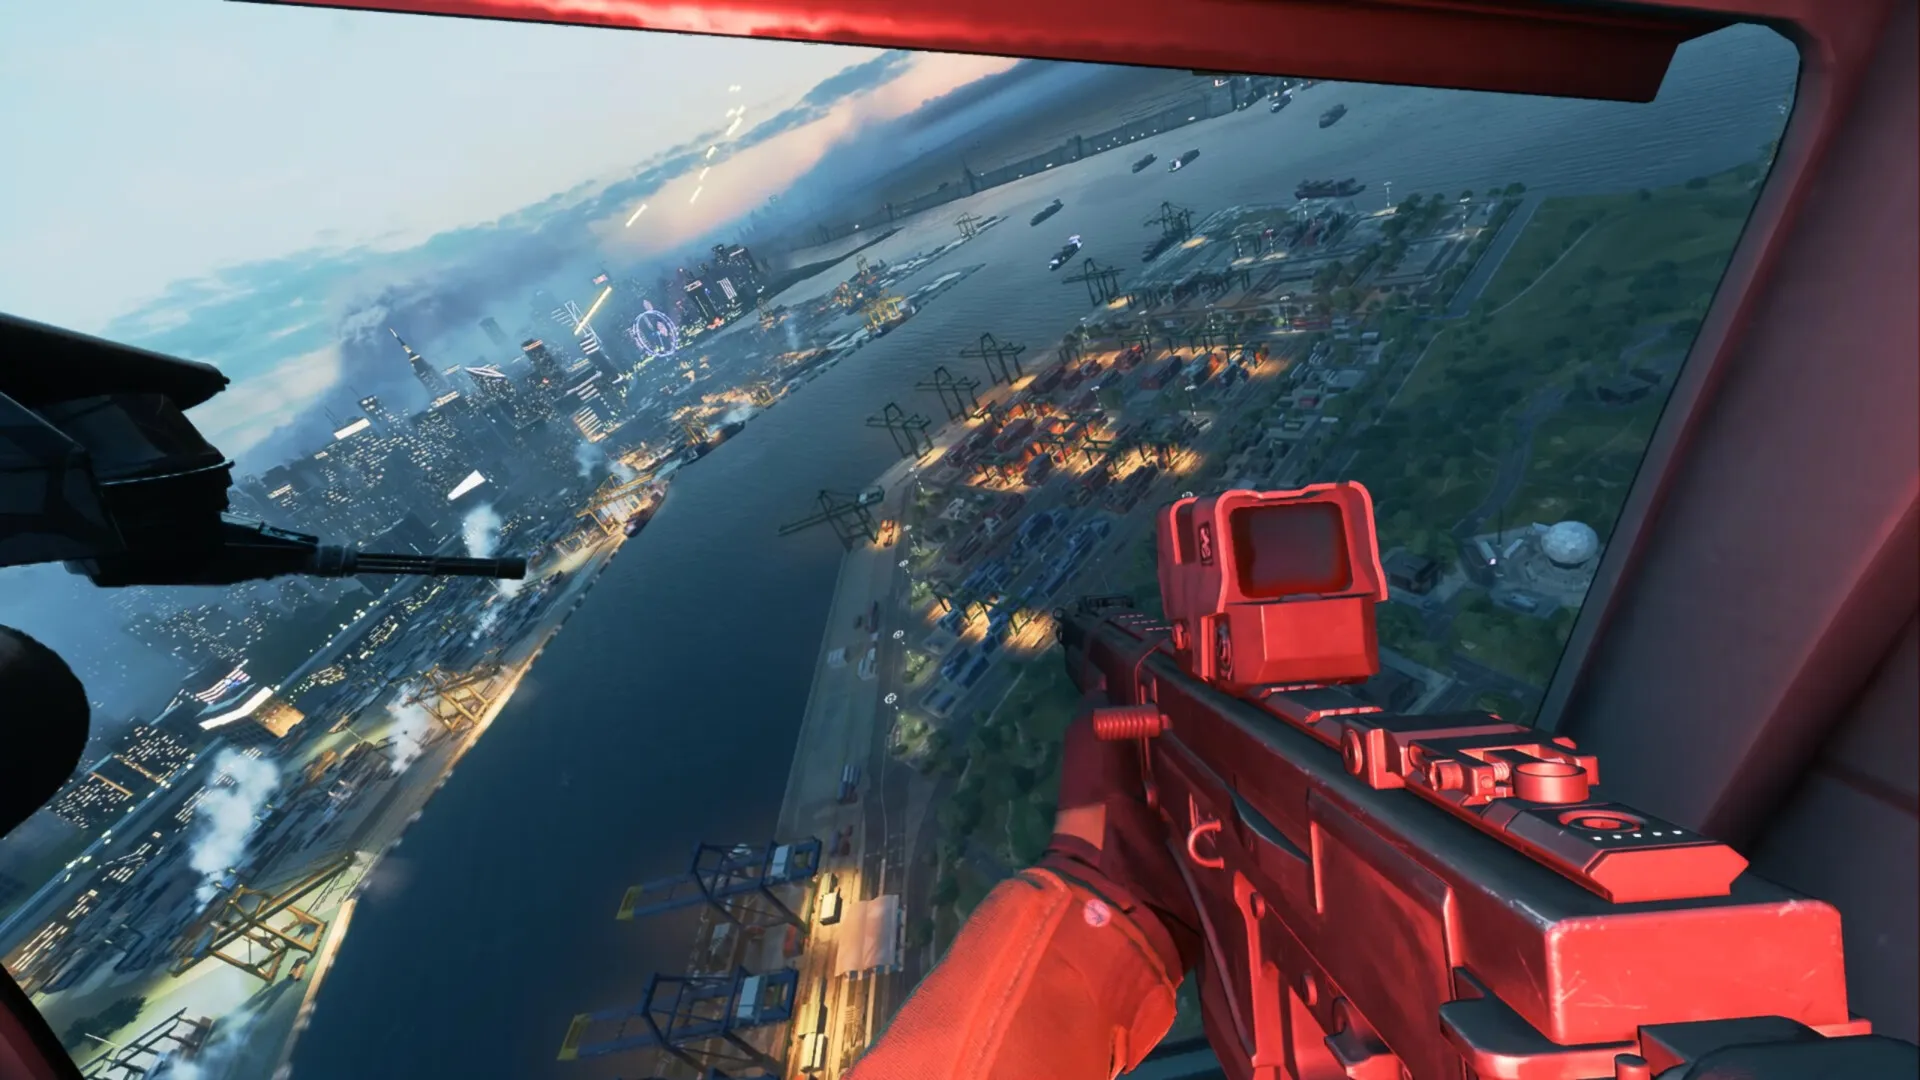 Battlefield 2042 PC Review - A Lot of Potential, But Not There Yet 